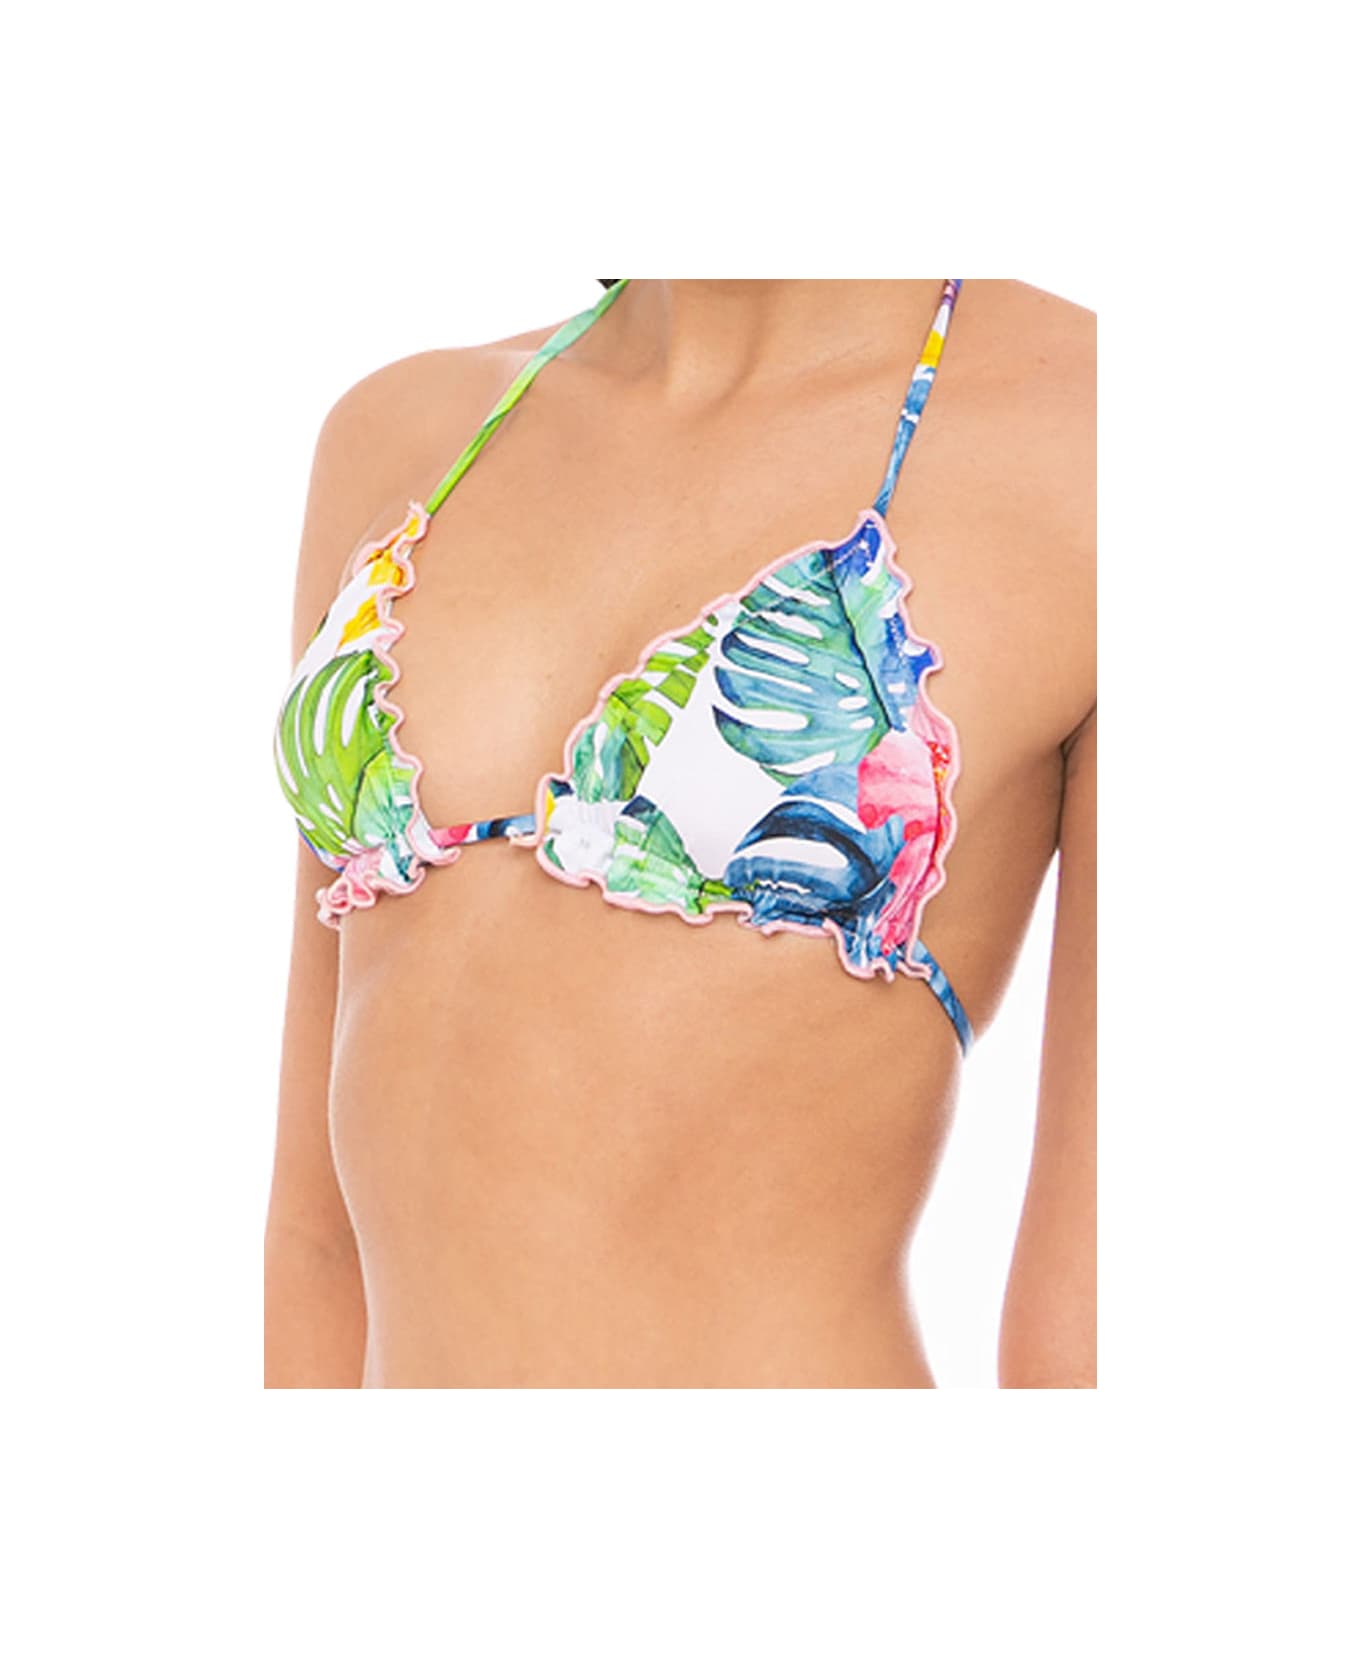 MC2 Saint Barth Woman Triangle Top Swimsuit With Tropical Print - MULTICOLOR 水着